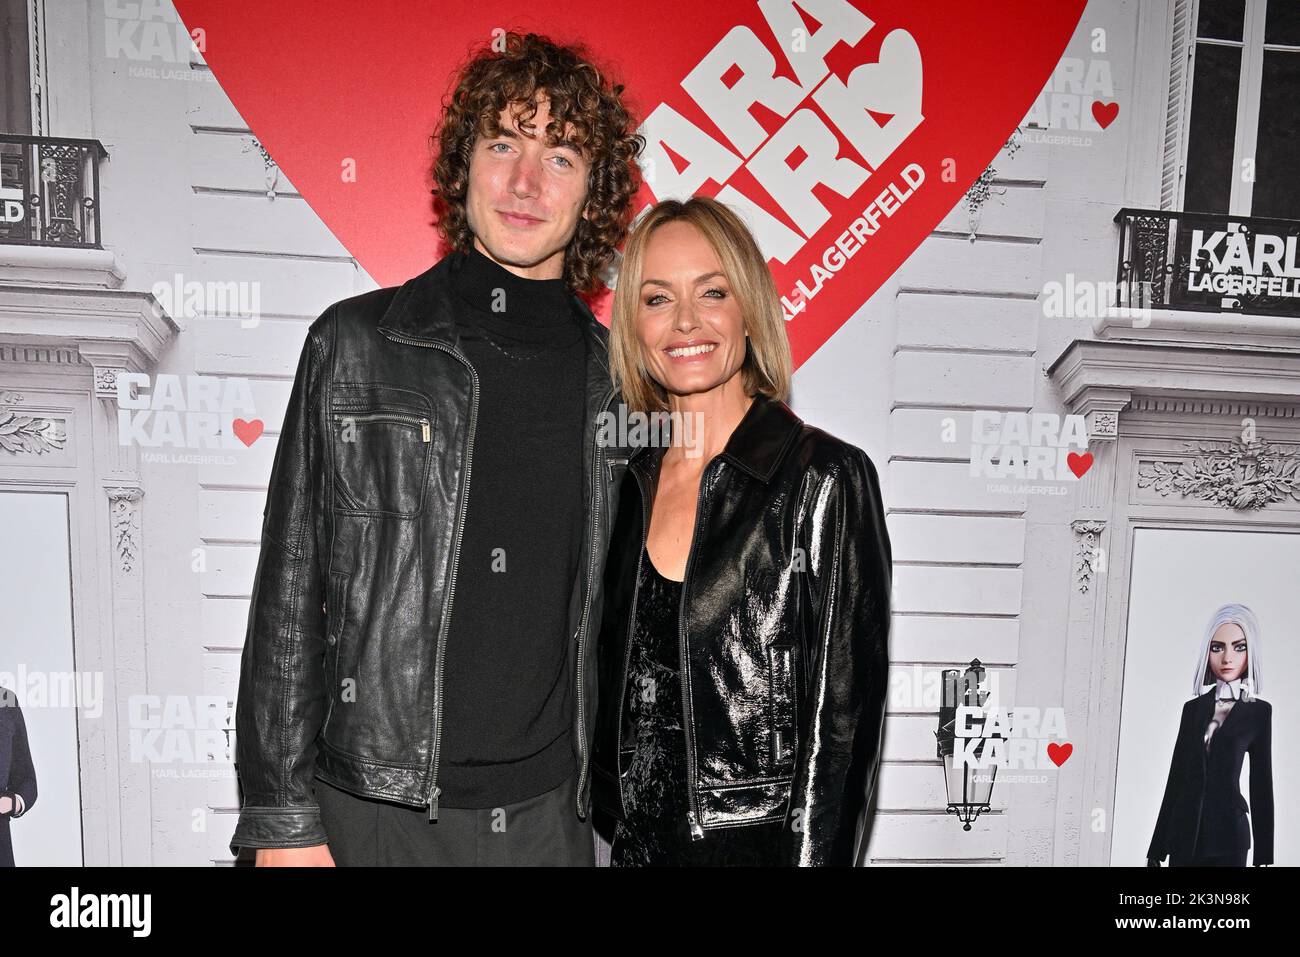 Paris, France, September 27, 2022. Amber Valletta and her son Auden McCaw attending the Cara Loves Karl party during Paris Fashion Week in Paris, France on September 27, 2022. Photo by Julien Reynaud/APS-Medias/ABACAPRESS.COM Stock Photo